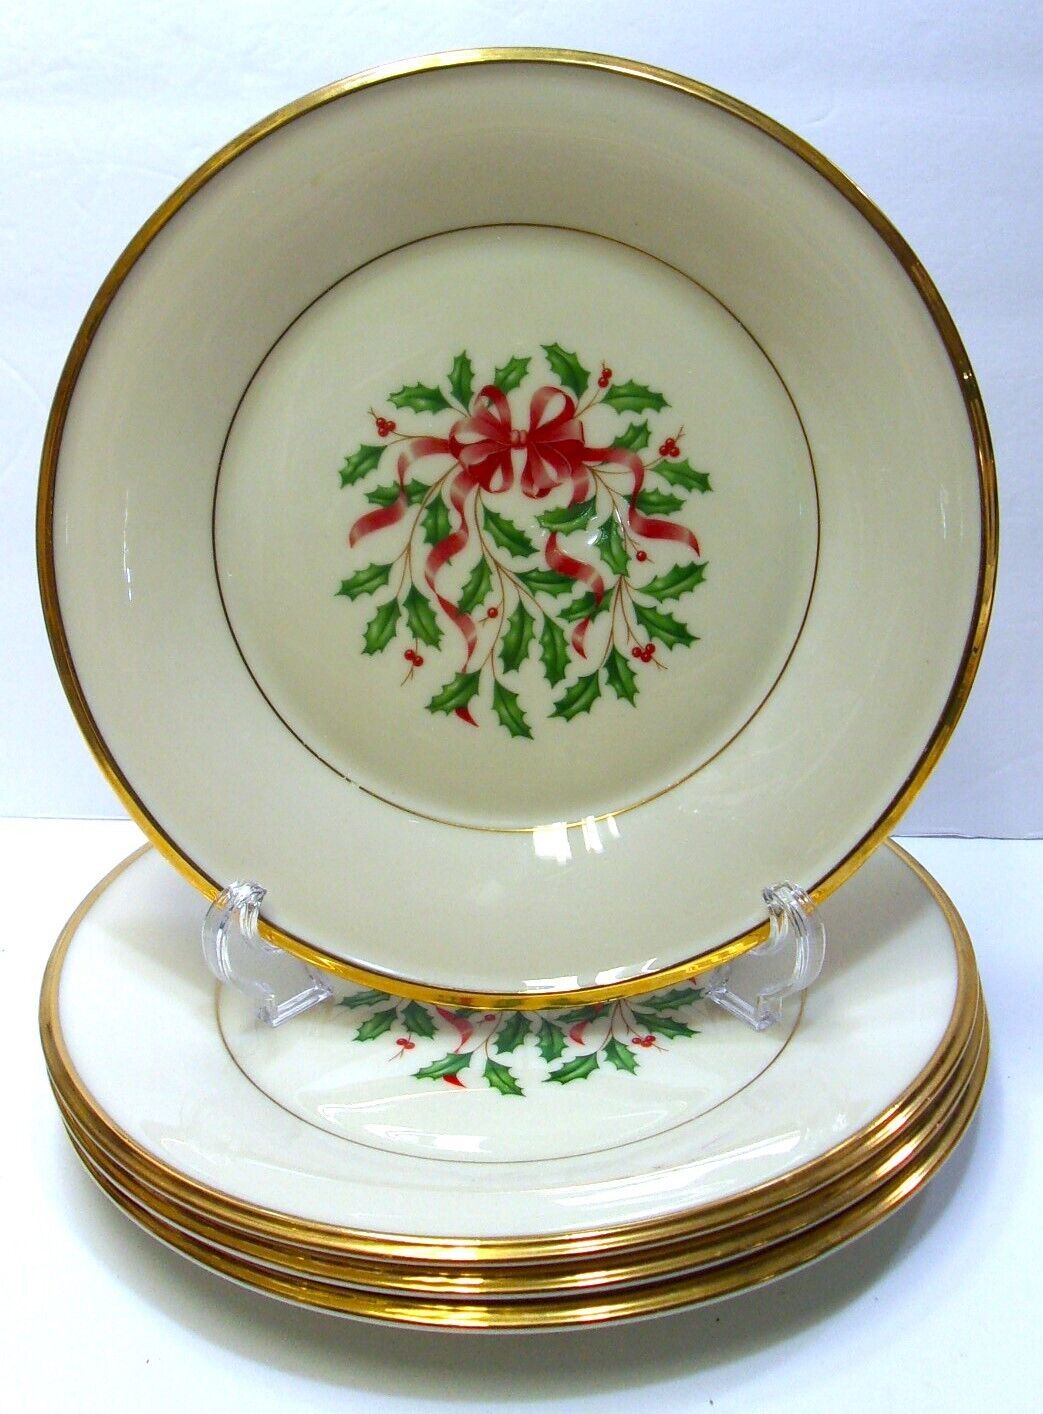 Set of 4~Lenox Oxford Bone China Holly/Berries/Red Bow Dinner Plates w/ Gold Rim